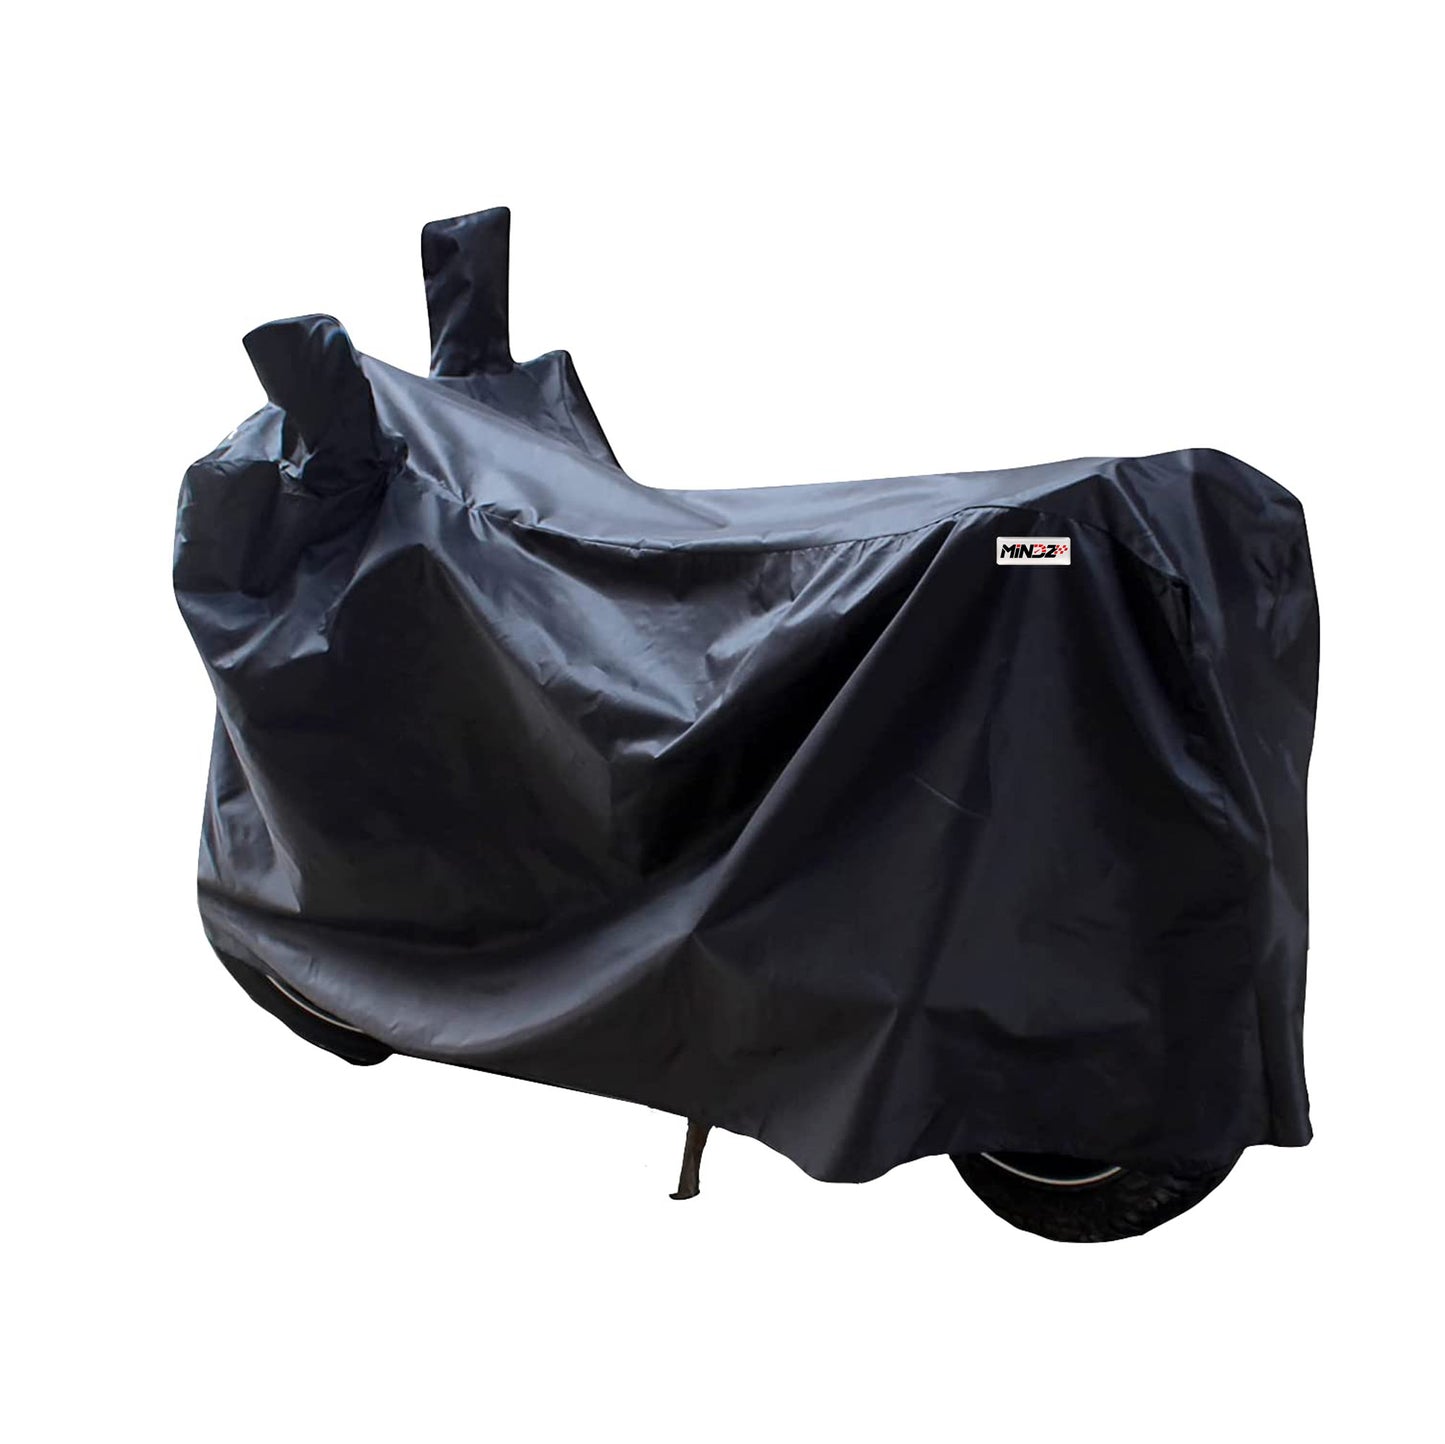 BODY COVER FOR FZ 25